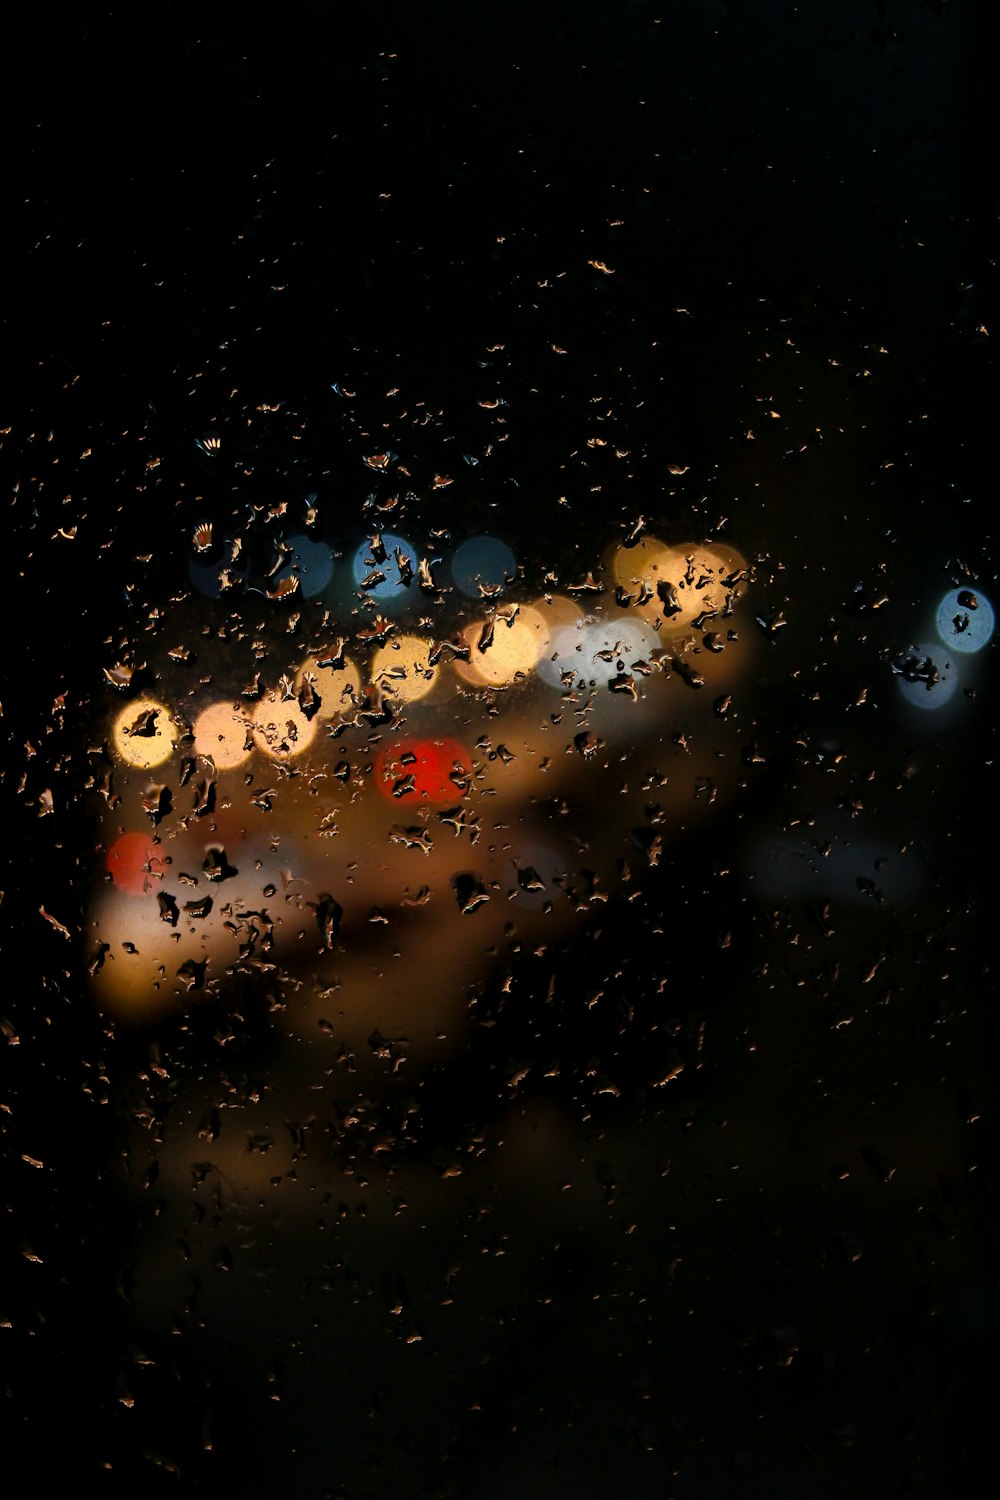 rain drops on a window with a blurry car in the background